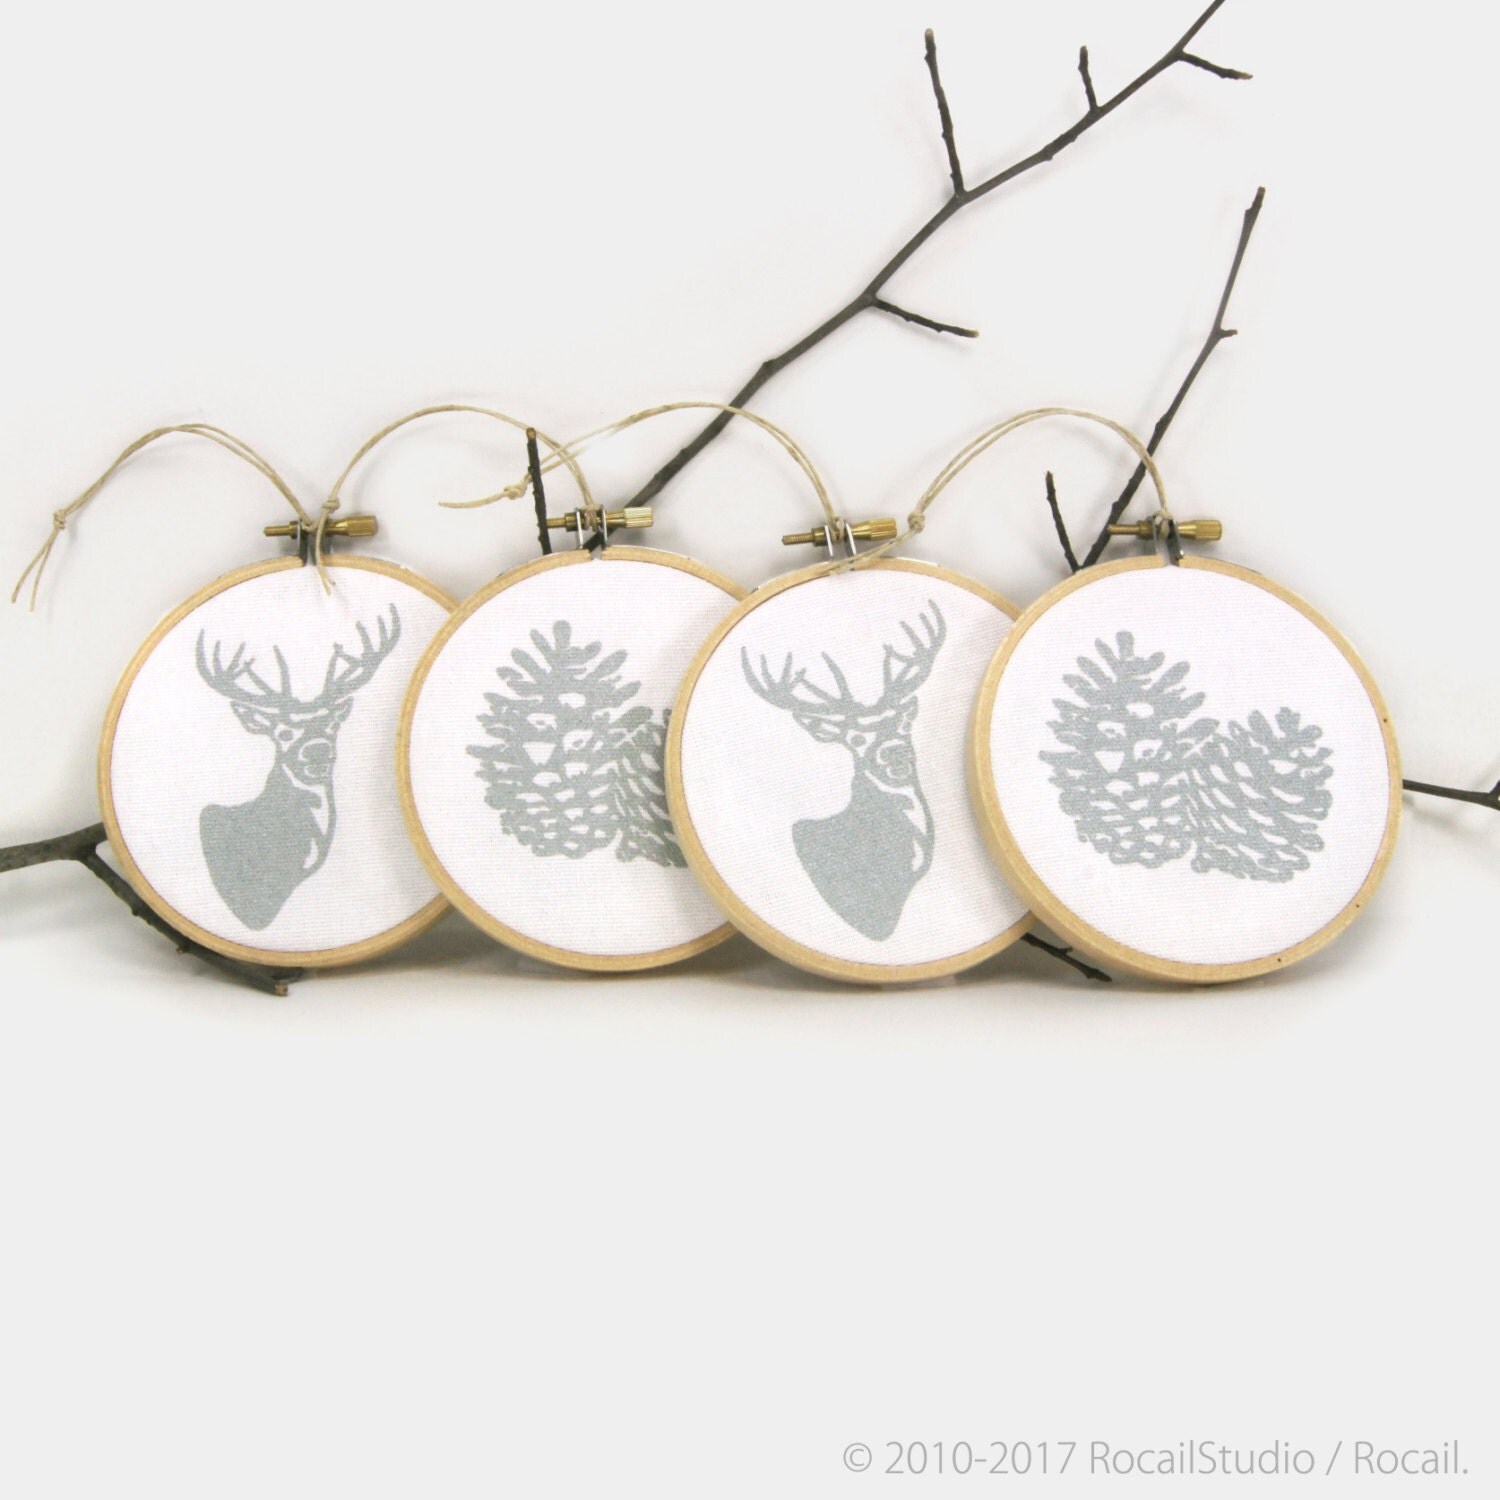 Silver and white Christmas Ornaments with deer and pinecone